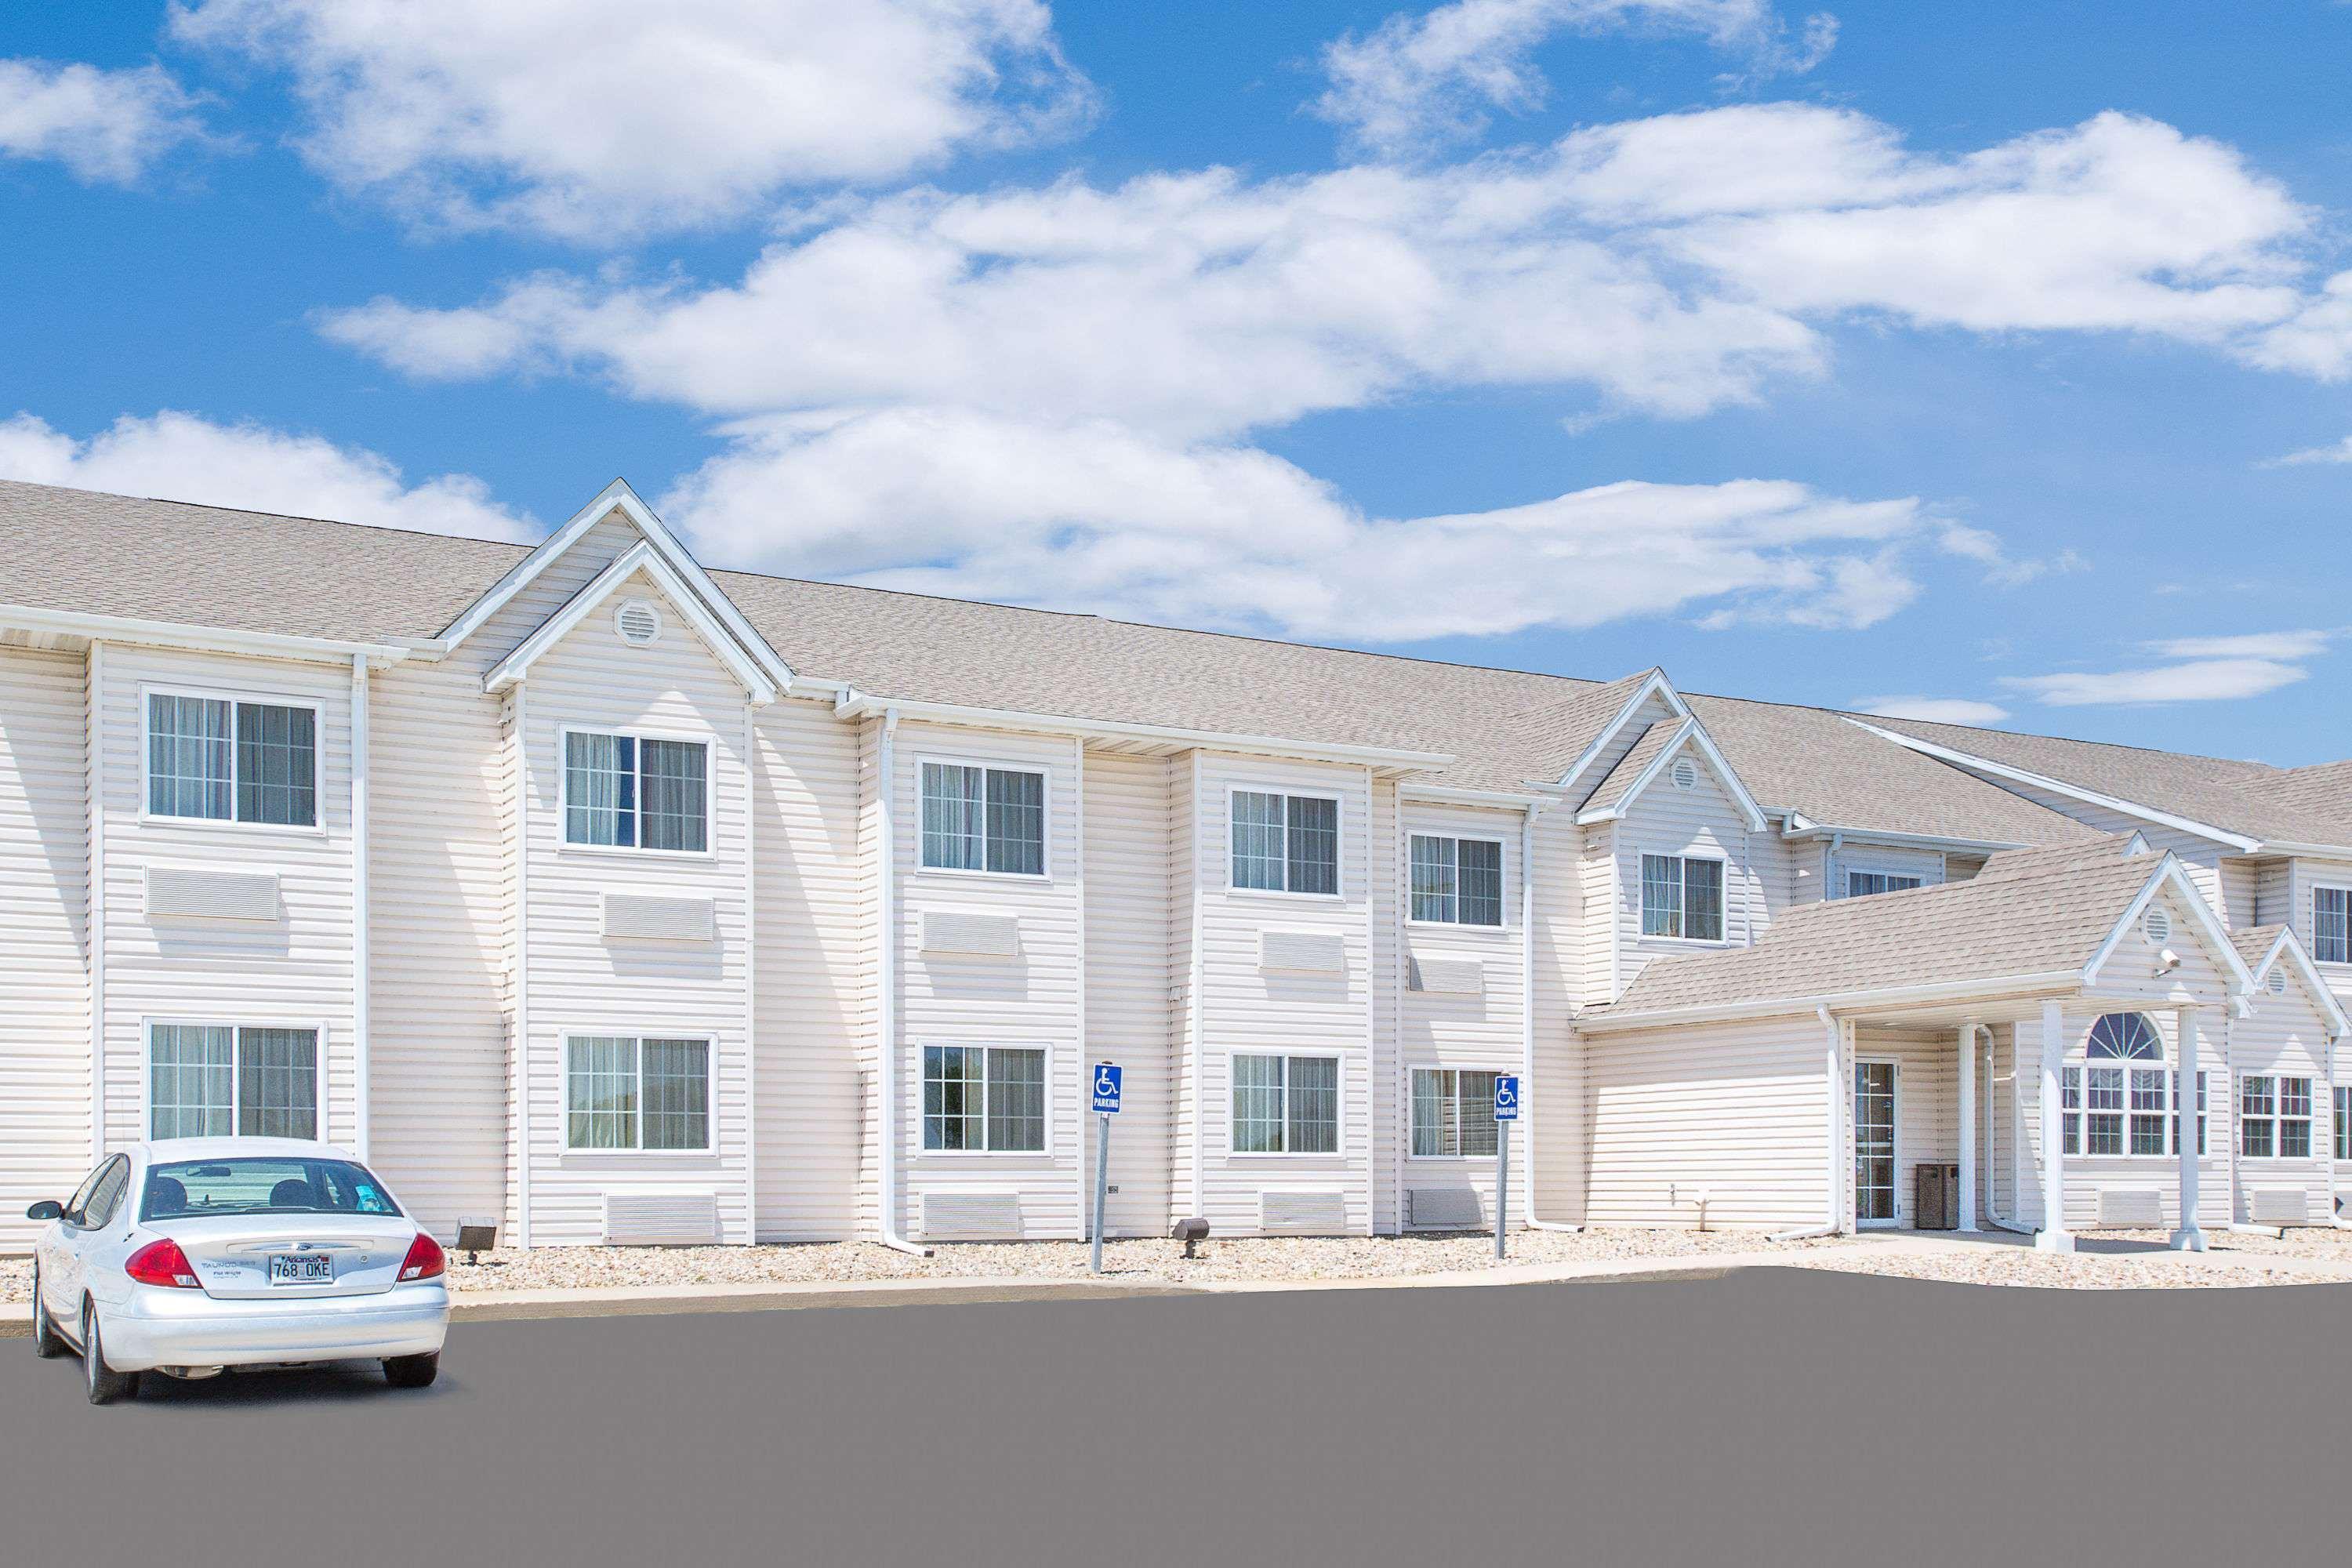 Microtel Inn And Suites Colfax/newton (Des Moines Area)